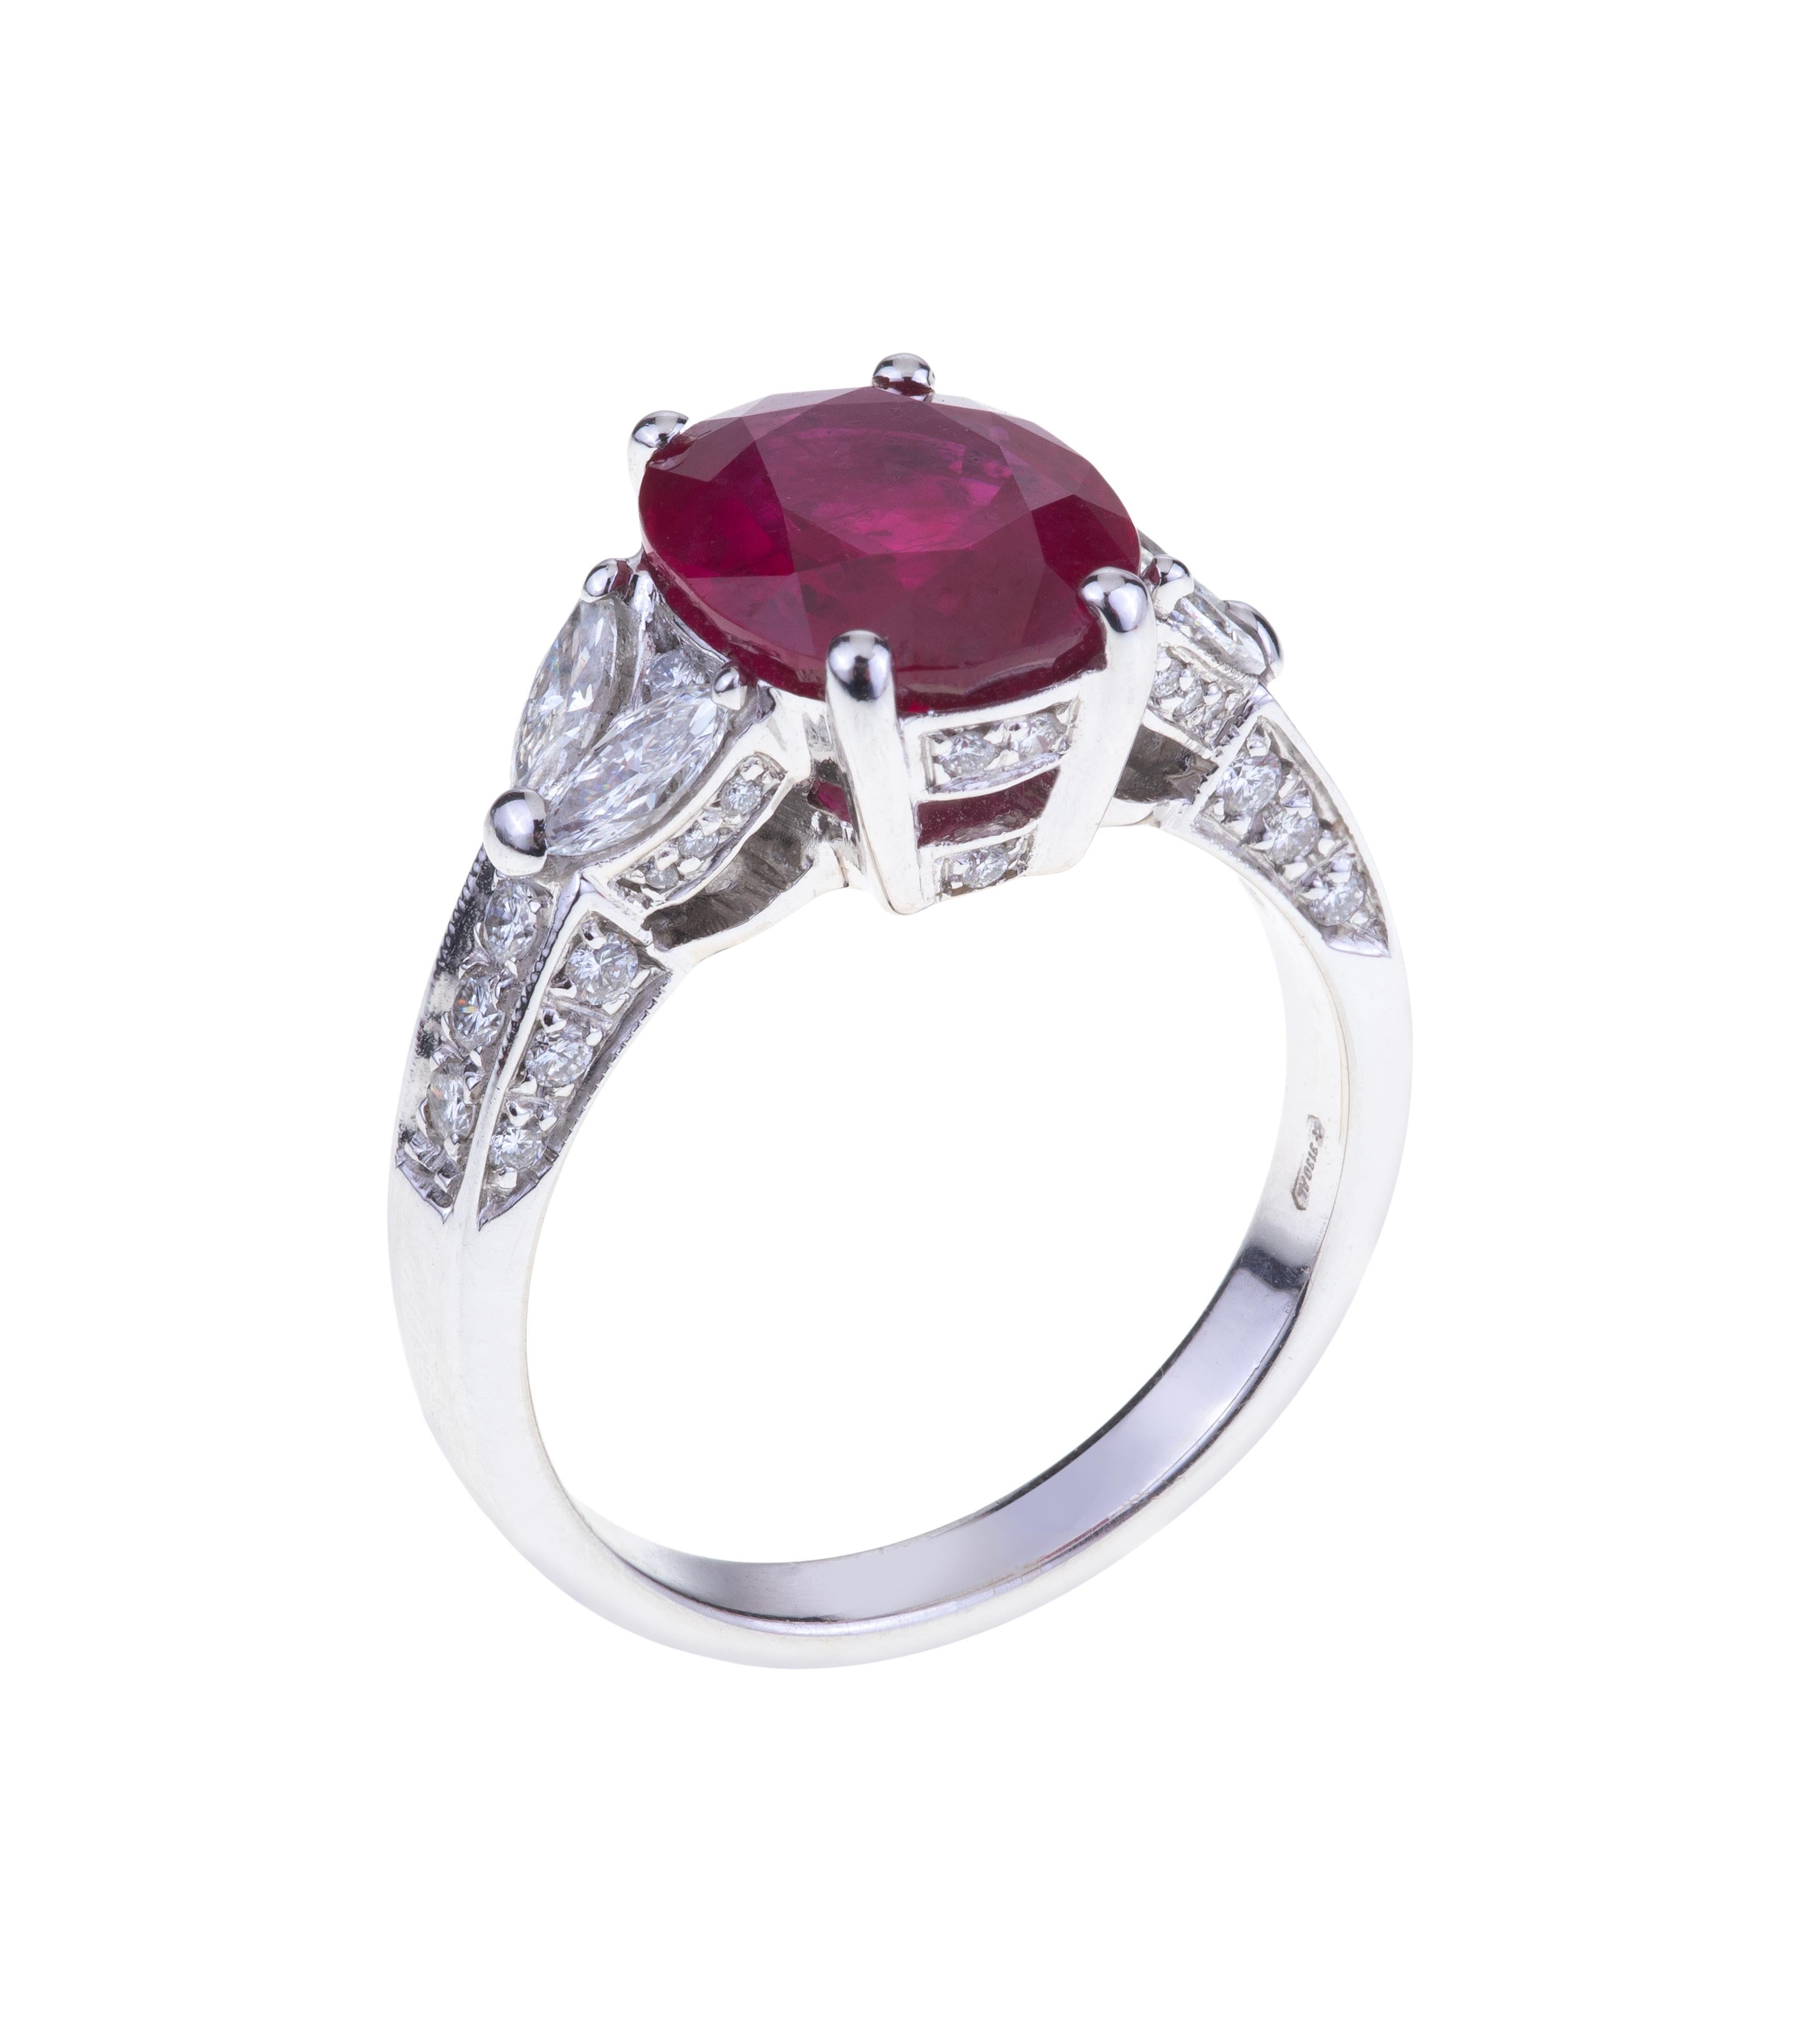 Stunning Oval Ruby Ring ct. 4.10 Certificate with Diamonds.
Classic Design for this Ring with a Stunning Ruby (ct. 4.10) with Diamonds on the side (ct. xxxx Round G-SI). The weight of 18kt Gold is xxxx Certificate 2016-0011322
Designed in